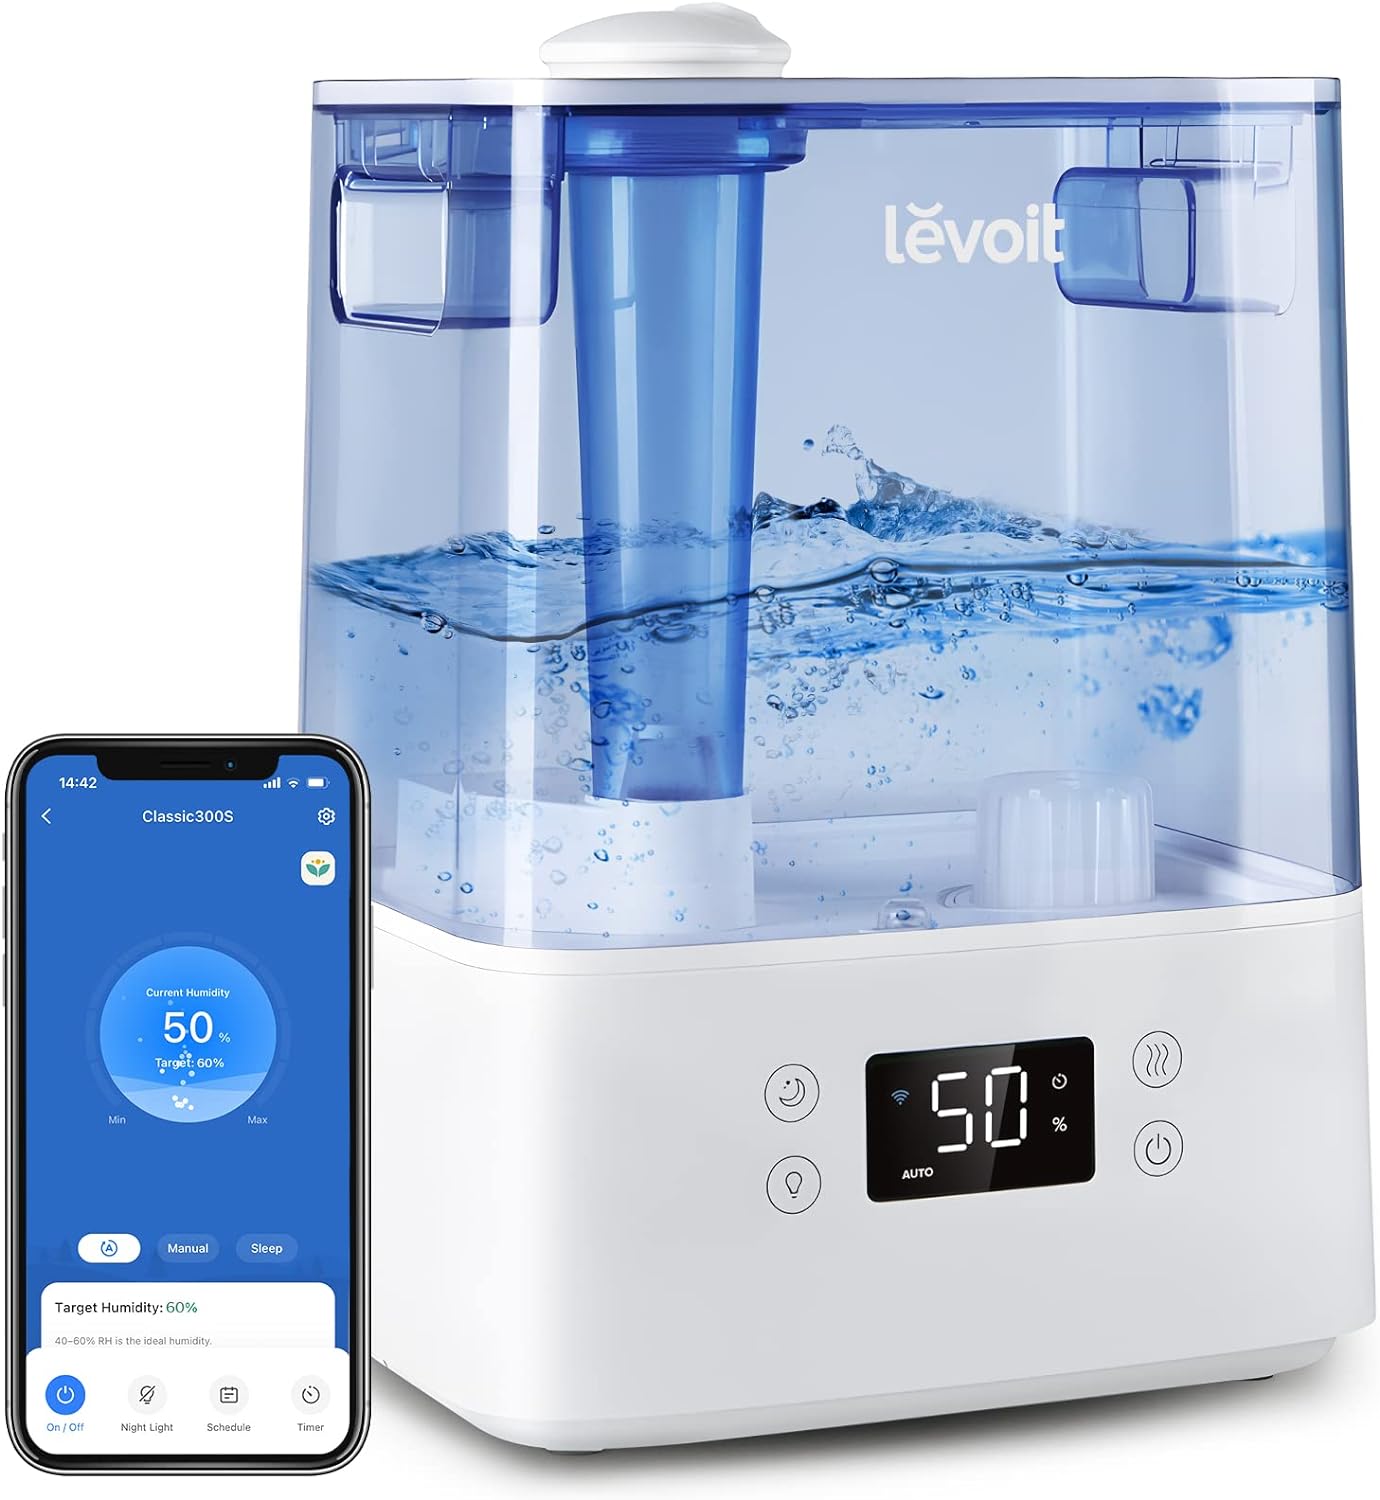 "LEVOIT 6L Cool Mist Humidifier with Essential Oil Diffuser - Smart App & Voice Control, Rapid Humidification, Auto Mode, Quiet Sleep Mode (Gray)"